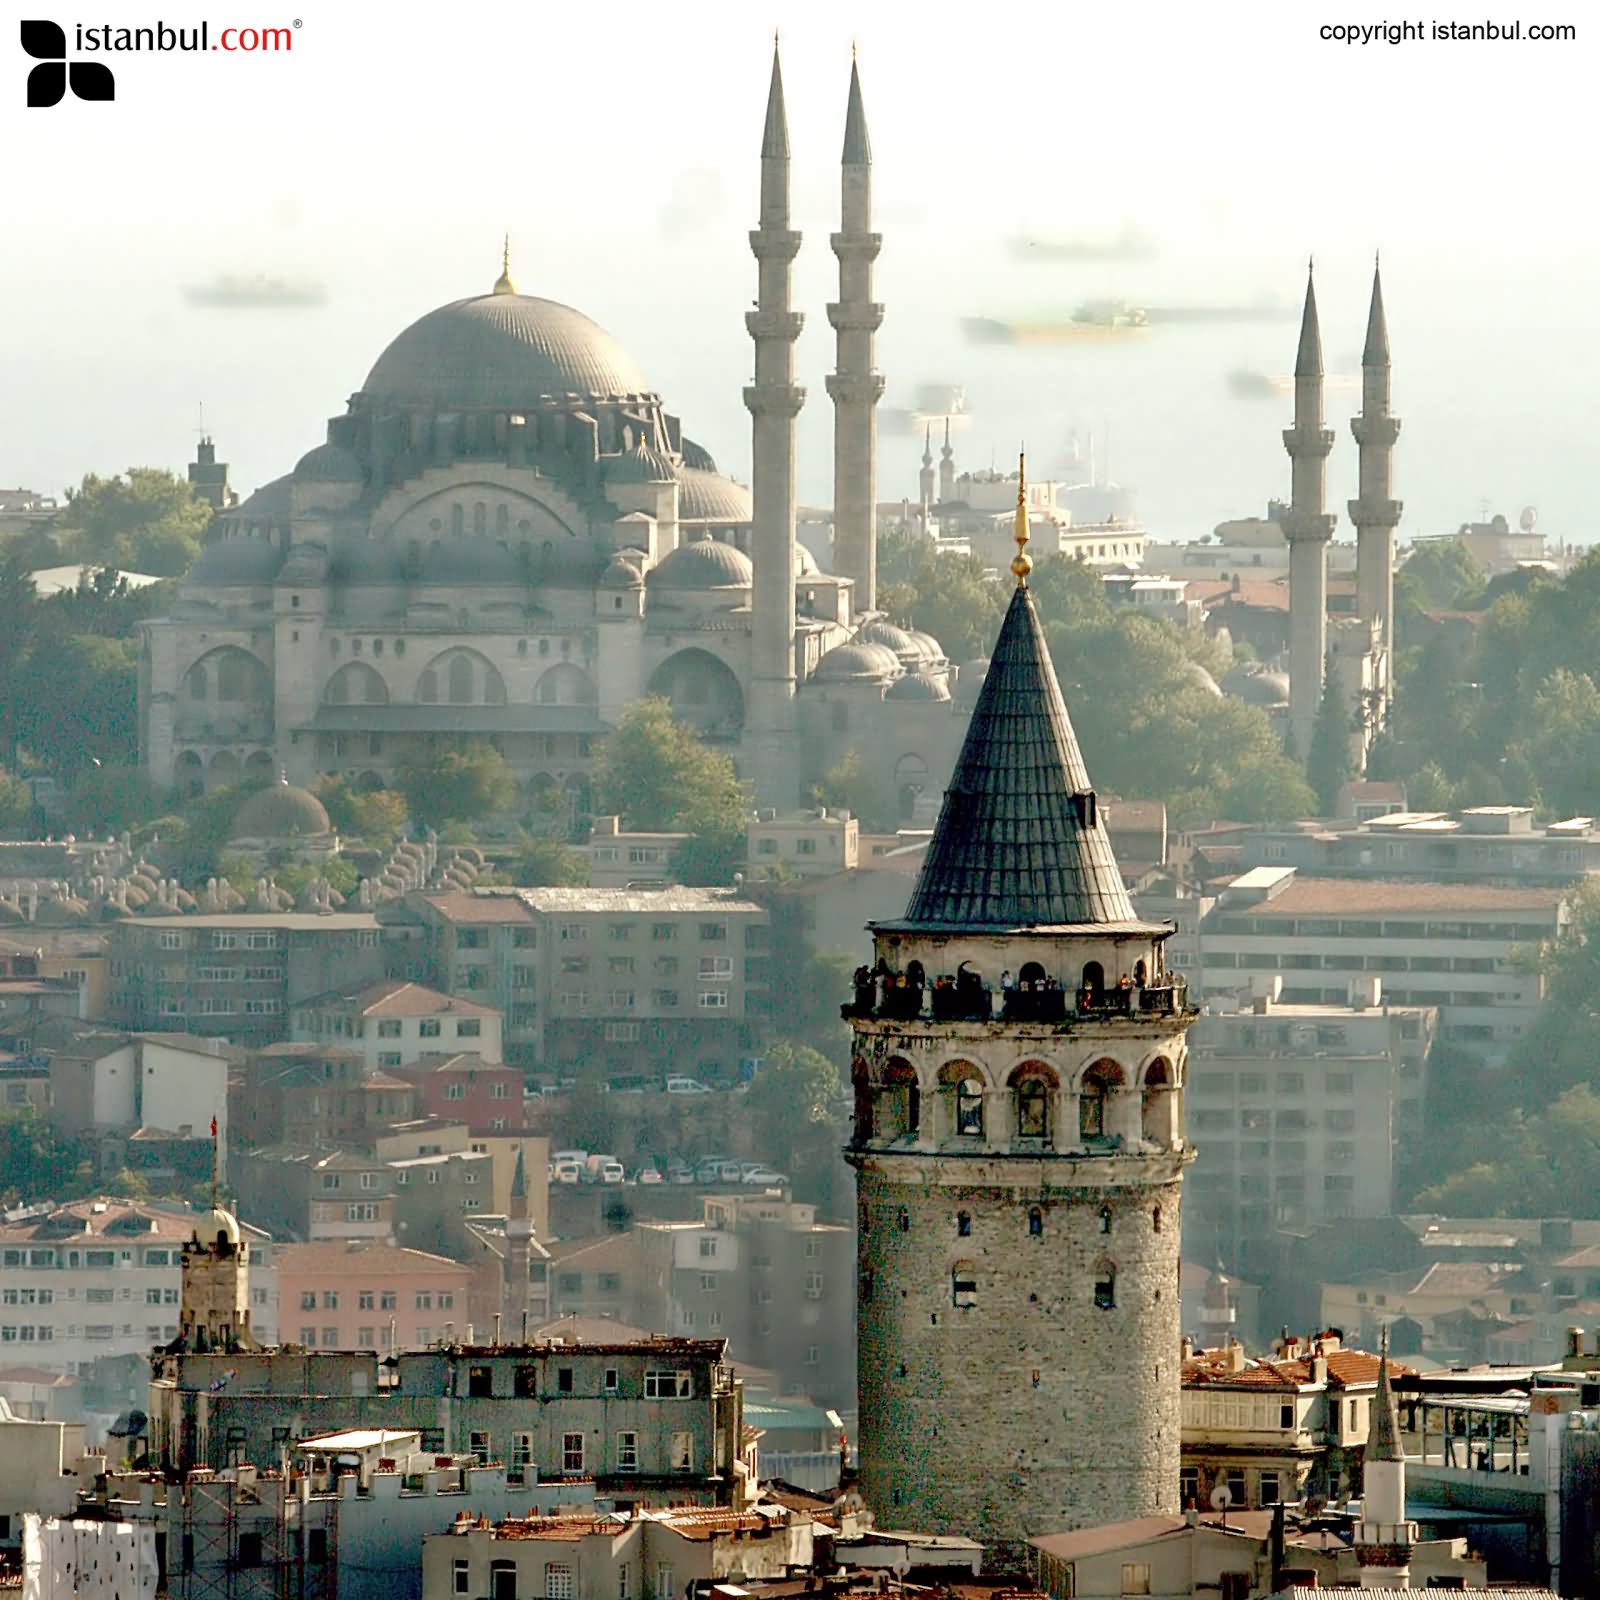 Adorable View Of The Galata Tower And Blue Mosque In Istanbul